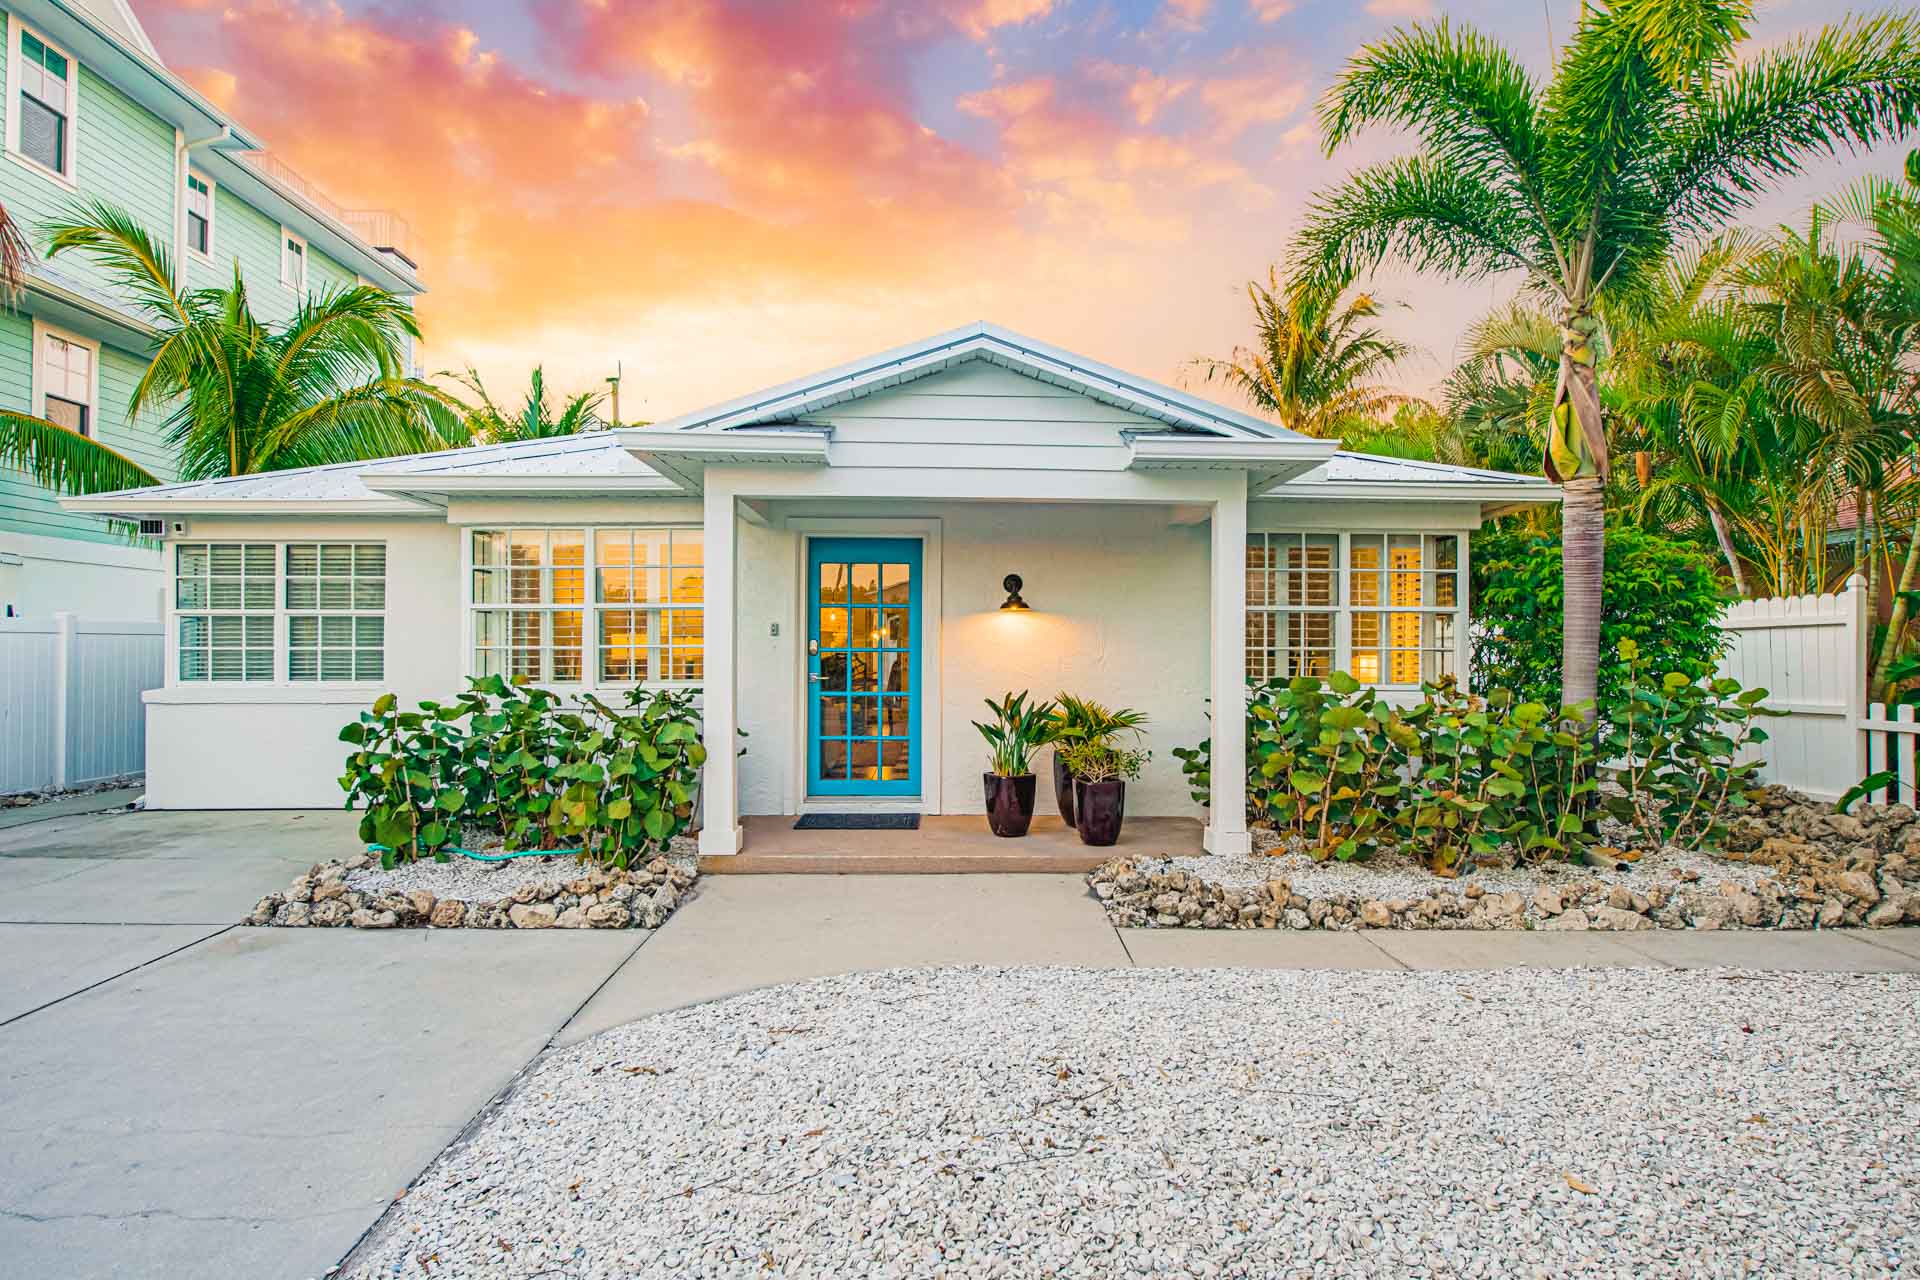 Mango Mama Pet Friendly Place To Stay On Vacation 4 Bedroom Lido Key Florida 146865 Find Rentals